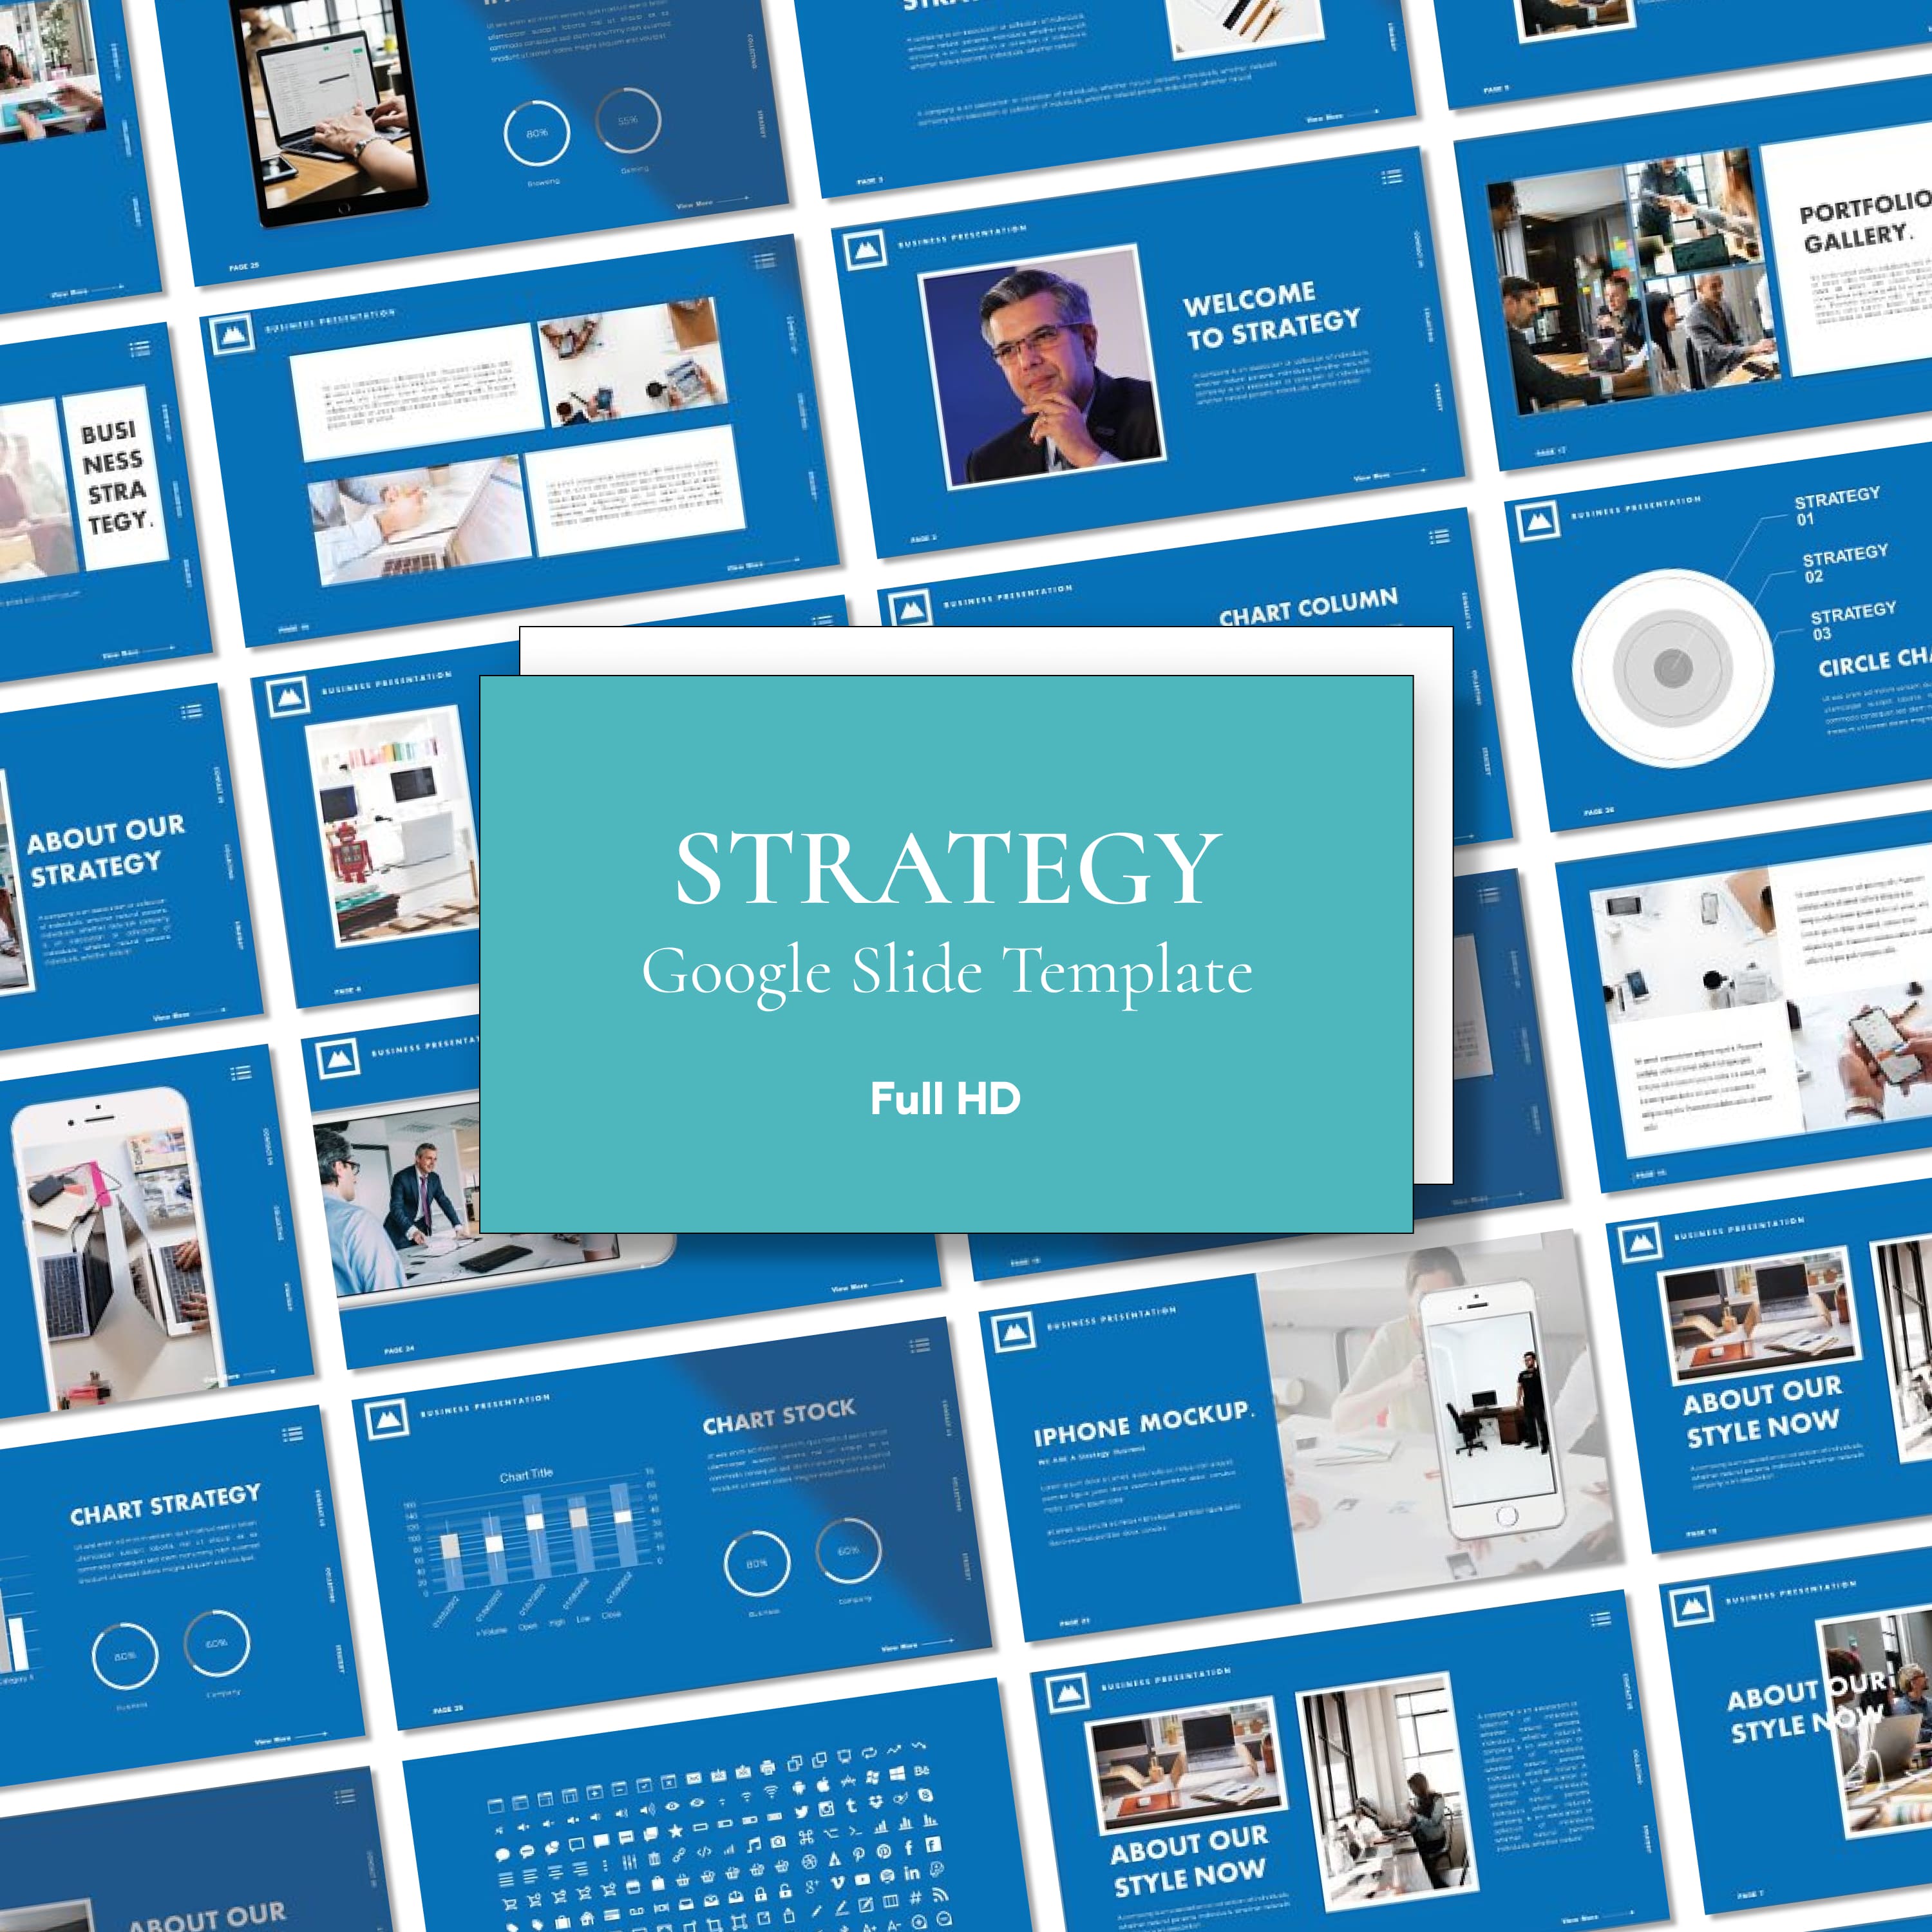 Strategy google slide template - main image preview.